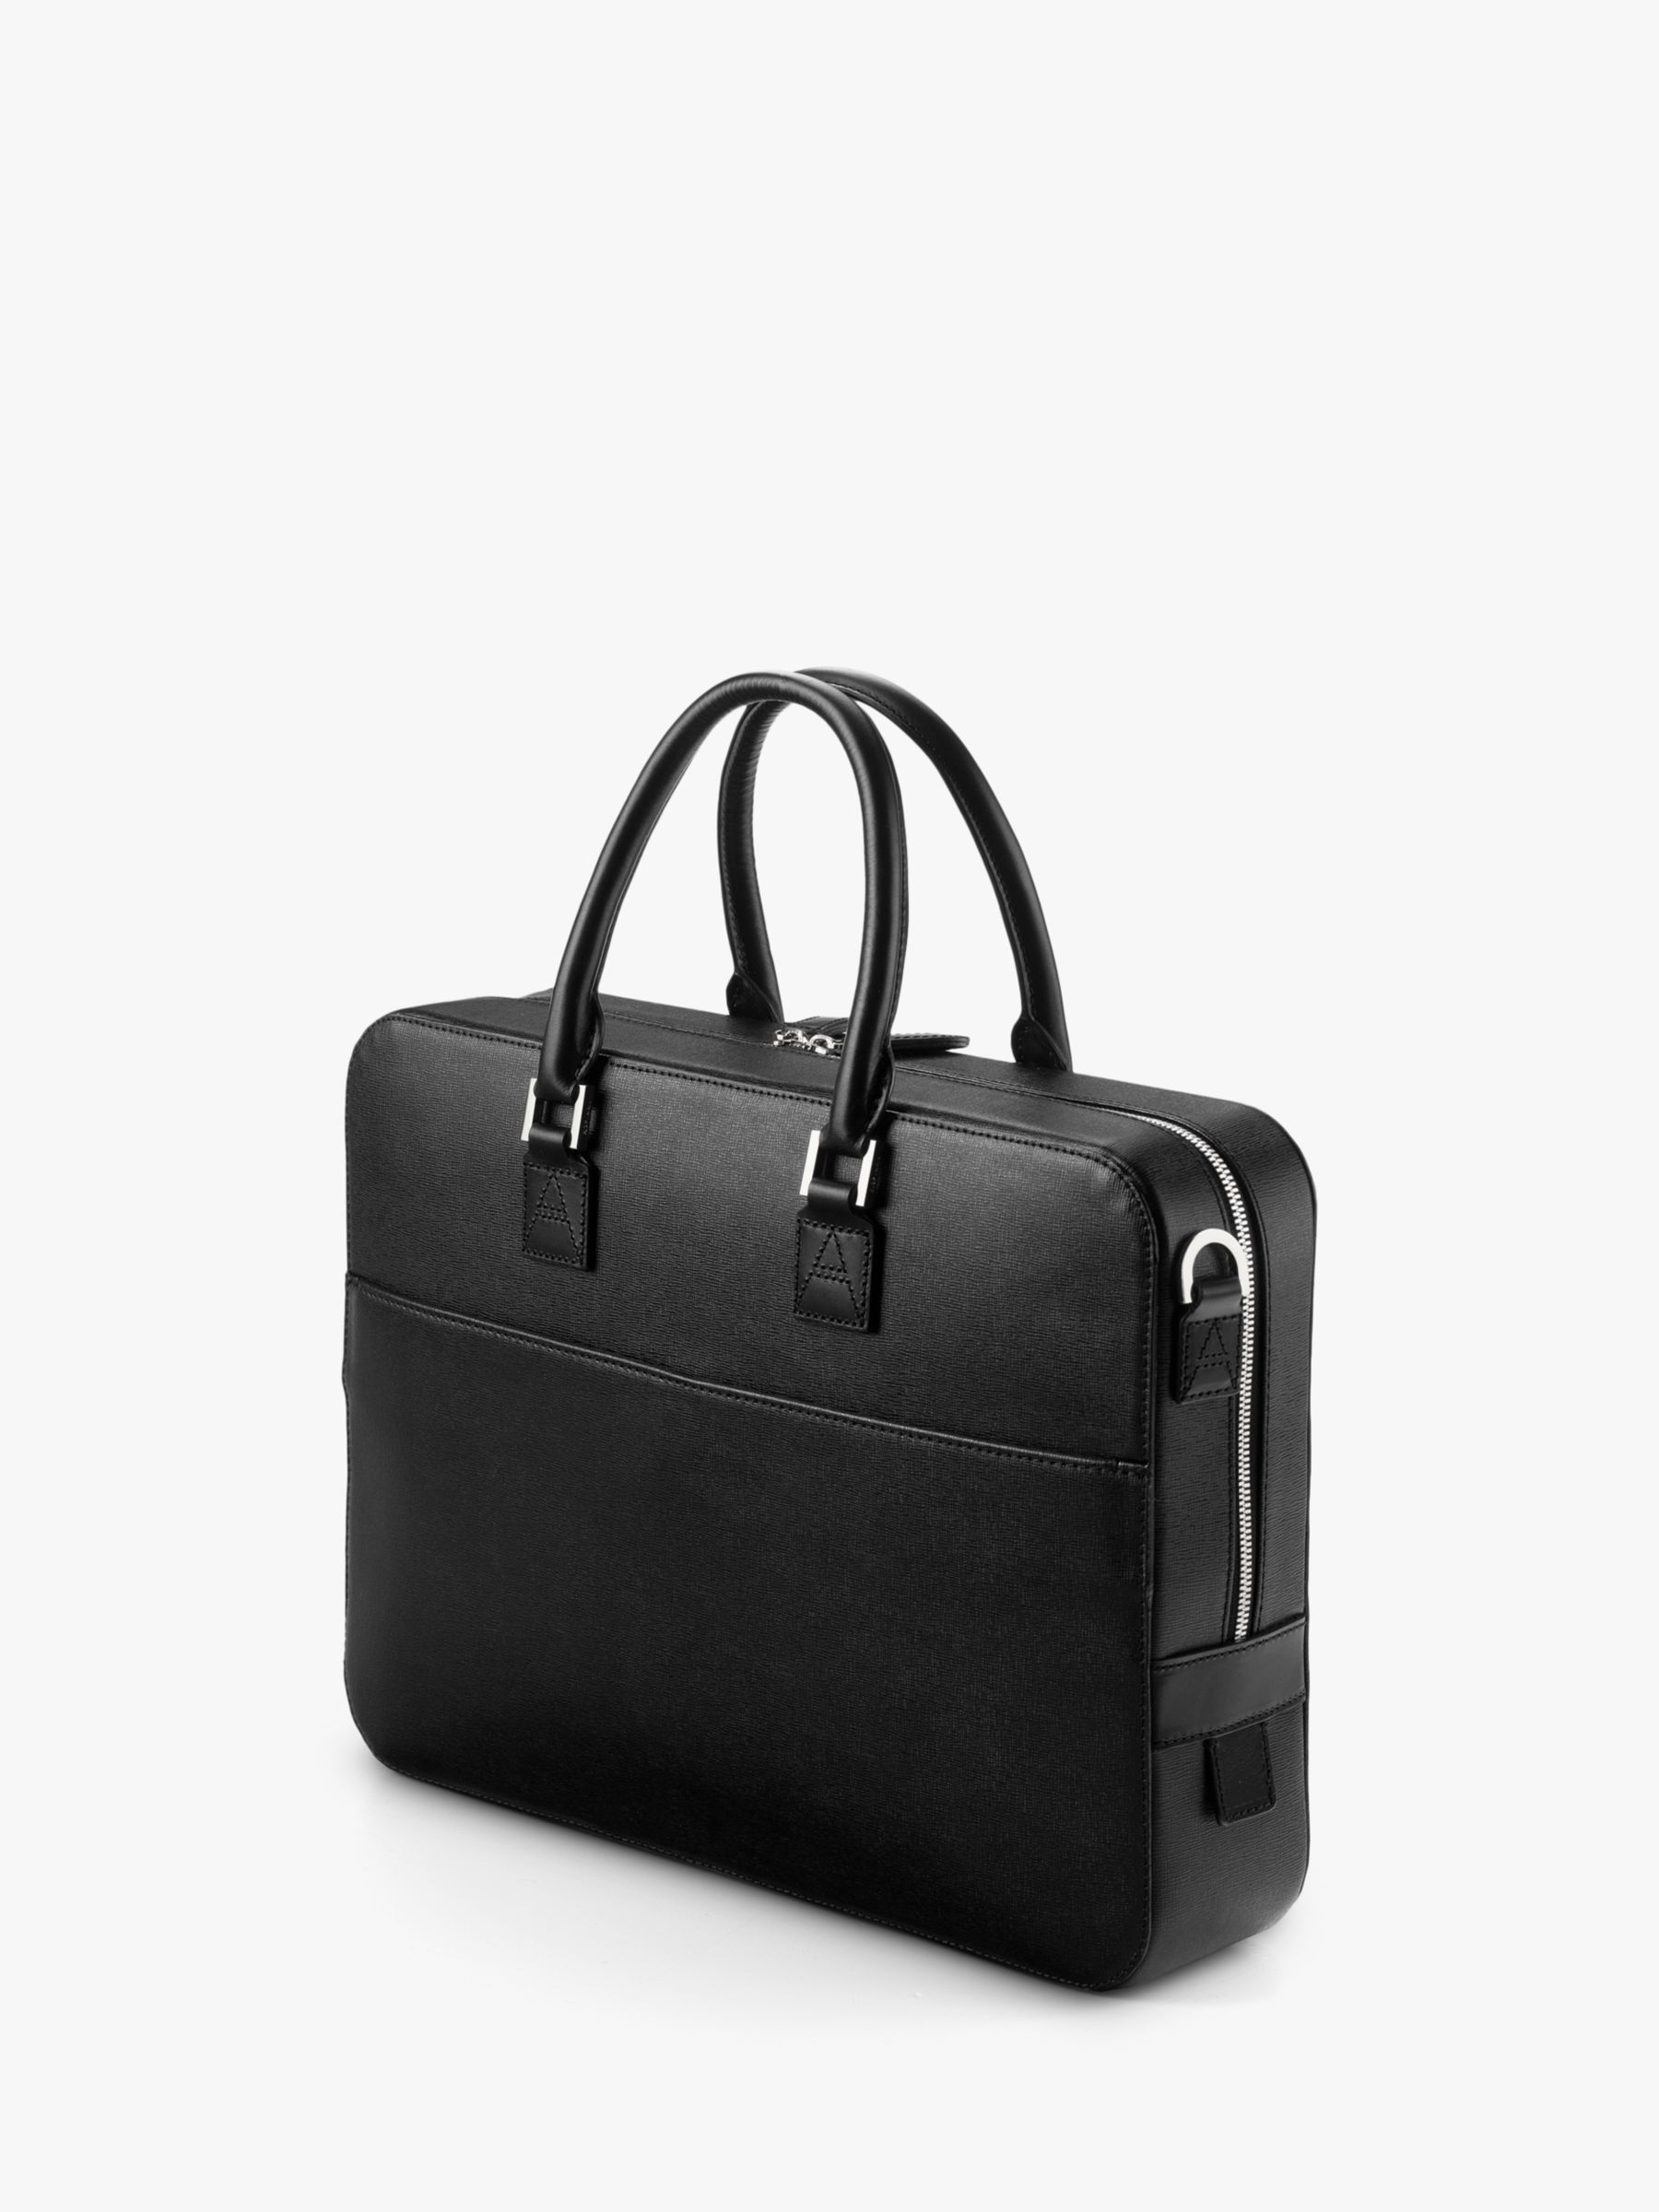 Aspinal of London Mount Street Small Saffiano Leather Laptop Bag, Black